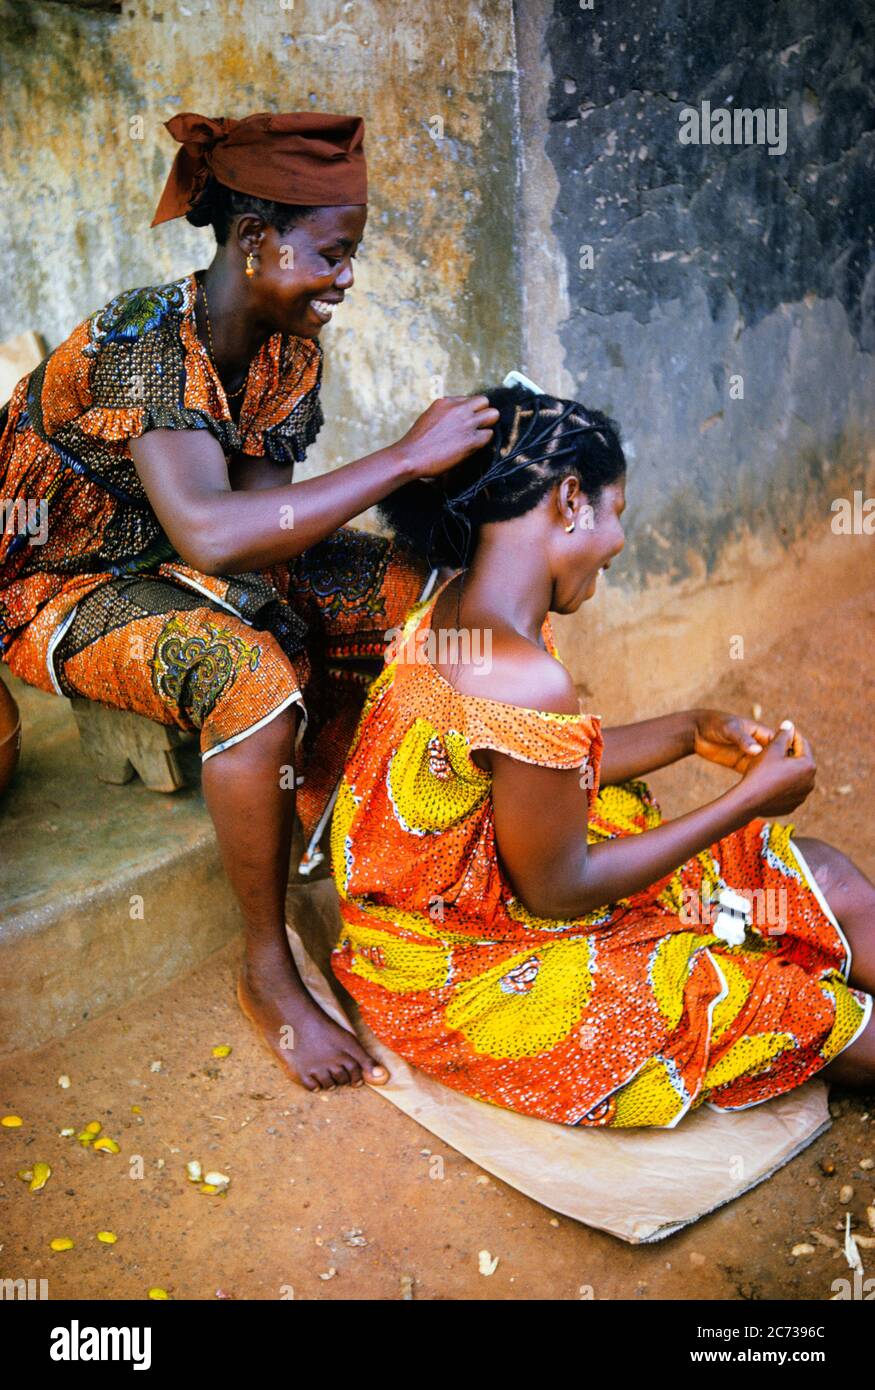 african hairdressing styles